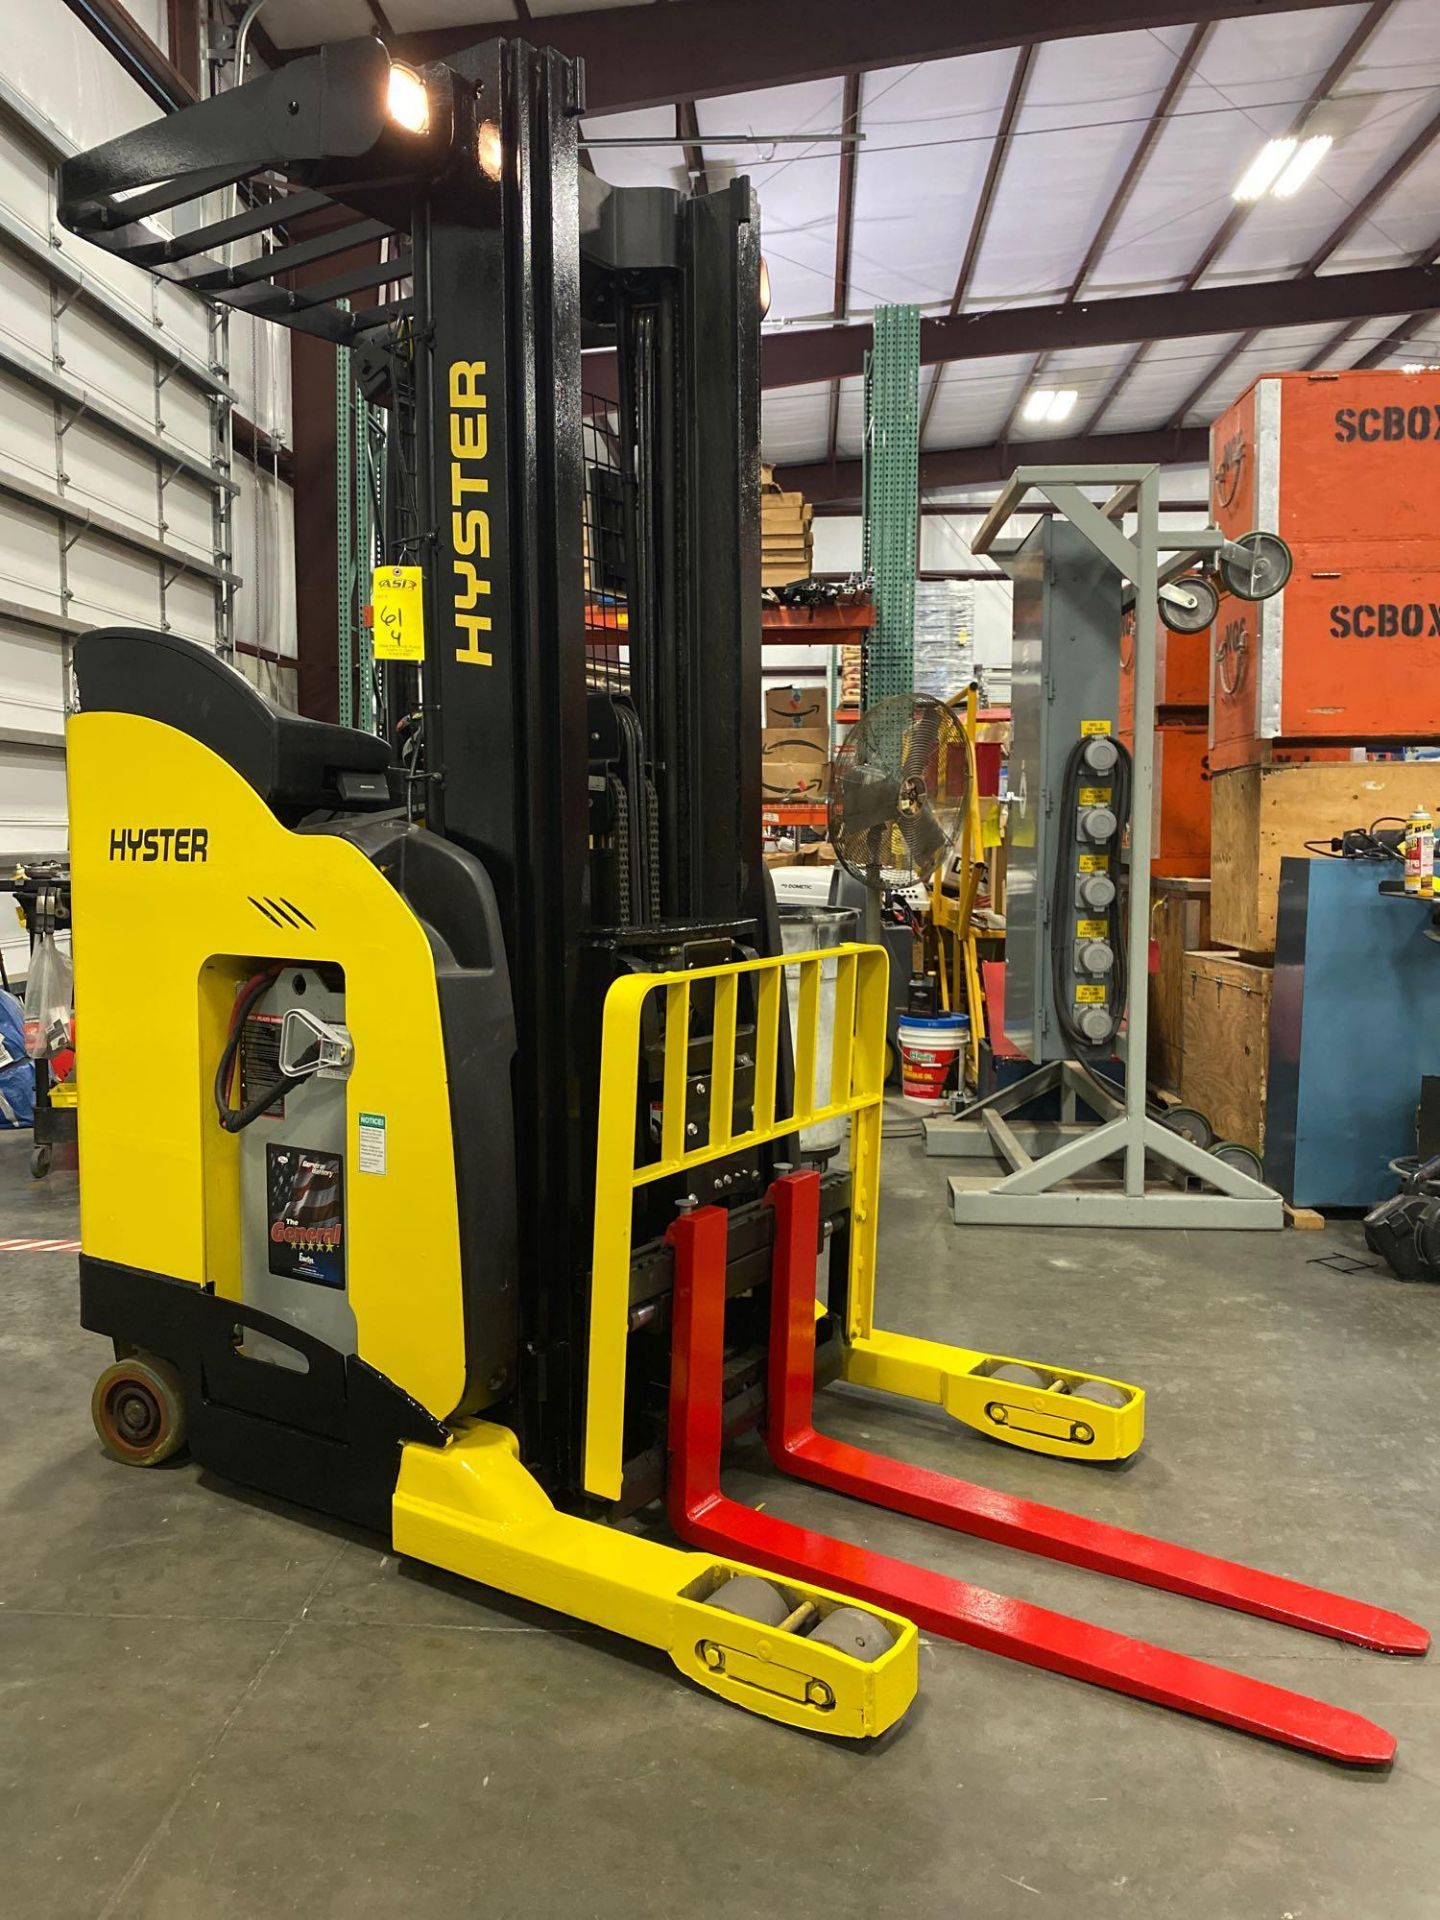 2011 HYSTER N35ZR-14.5 ELECTRIC REACH TRUCK, 3,500 LB CAPACITY, 36V, 212" HEIGHT CAP, ADJUSTABLE BAC - Image 2 of 9